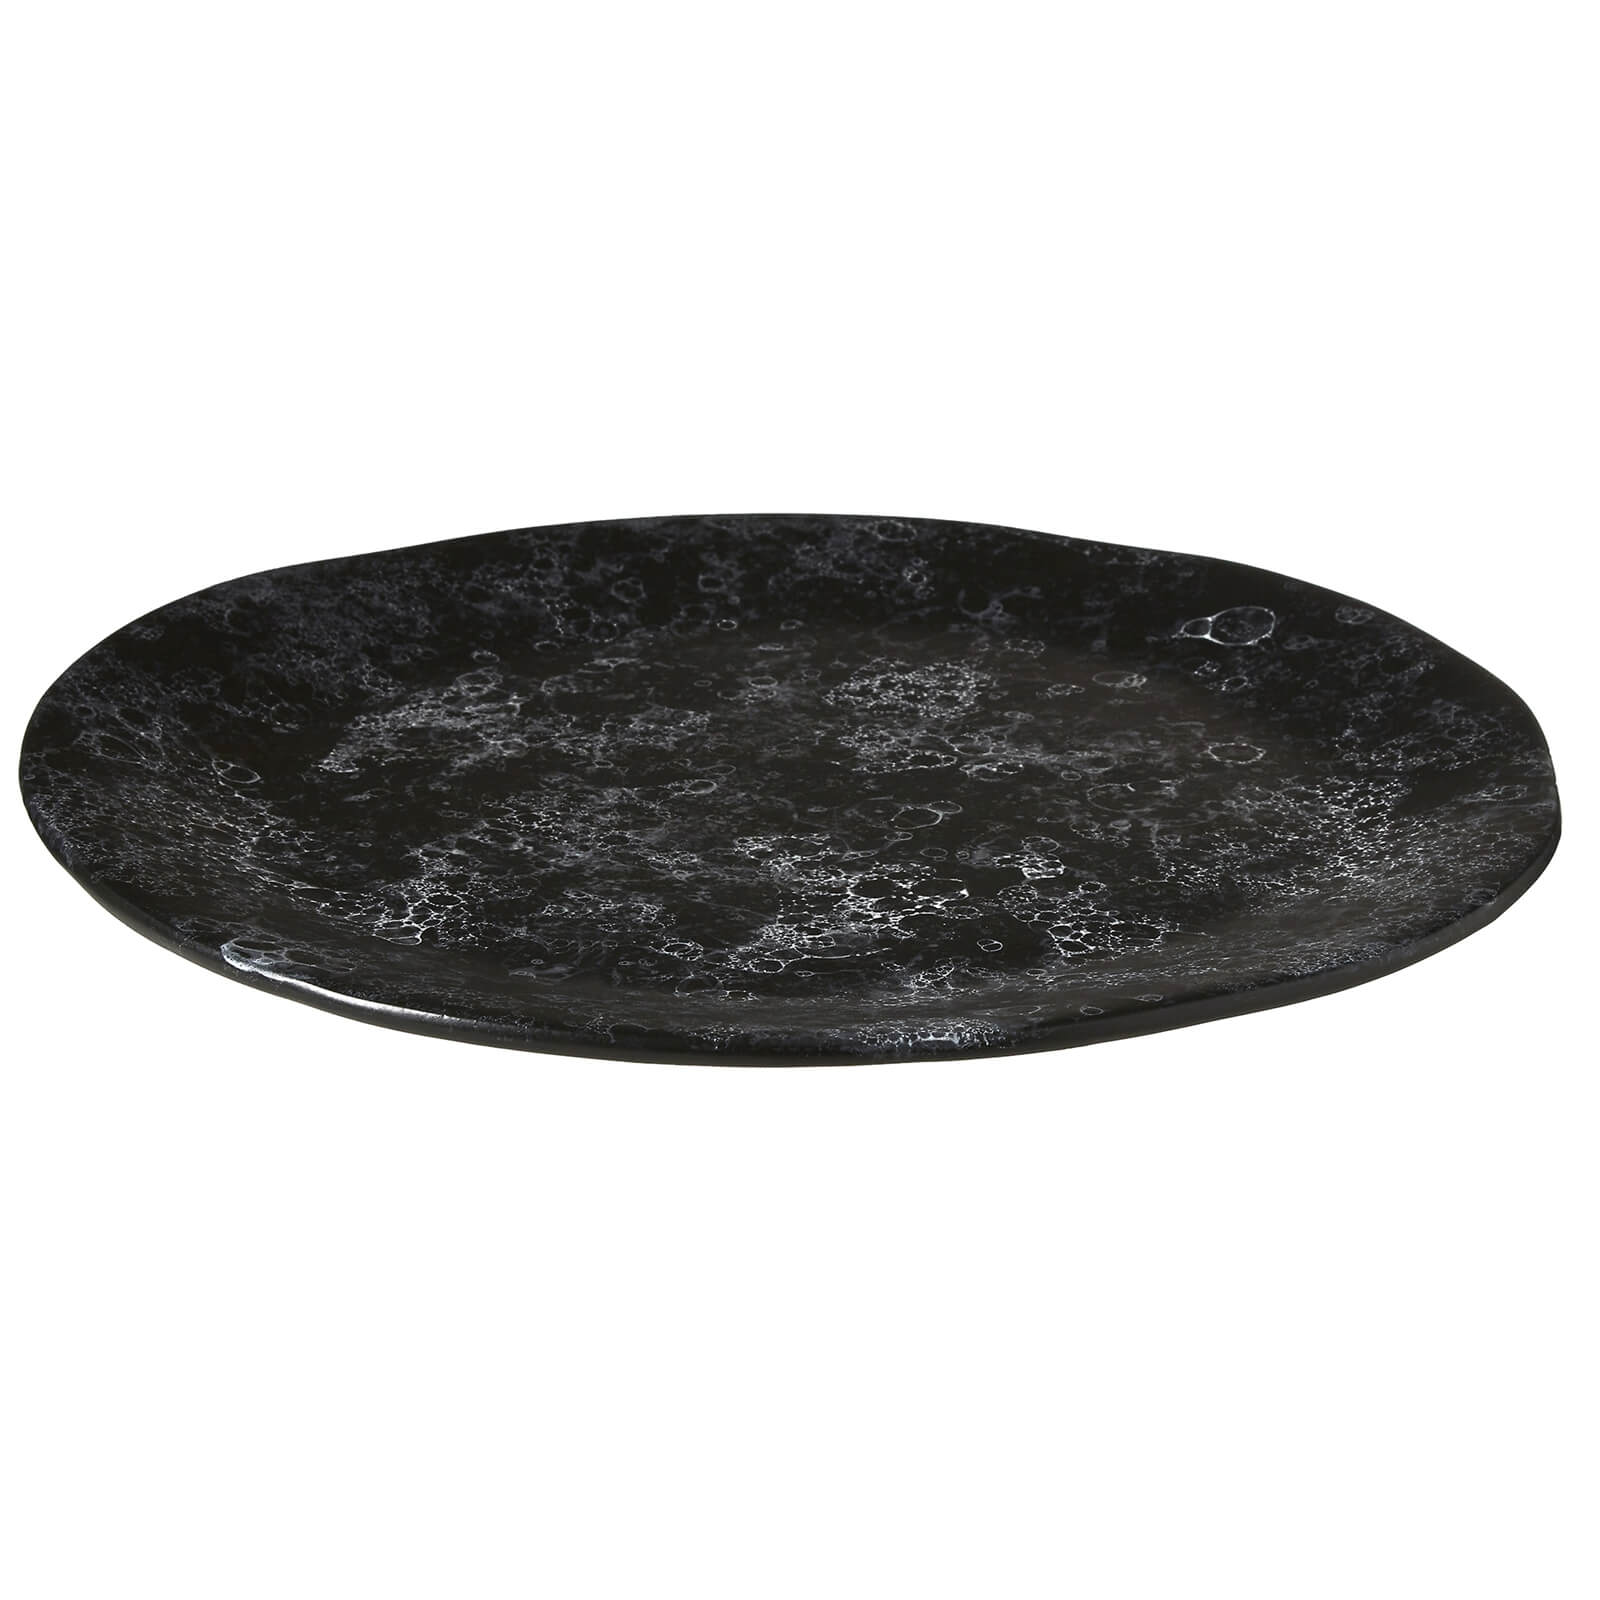 Hygge Pizza Plate - Black Faux Marble